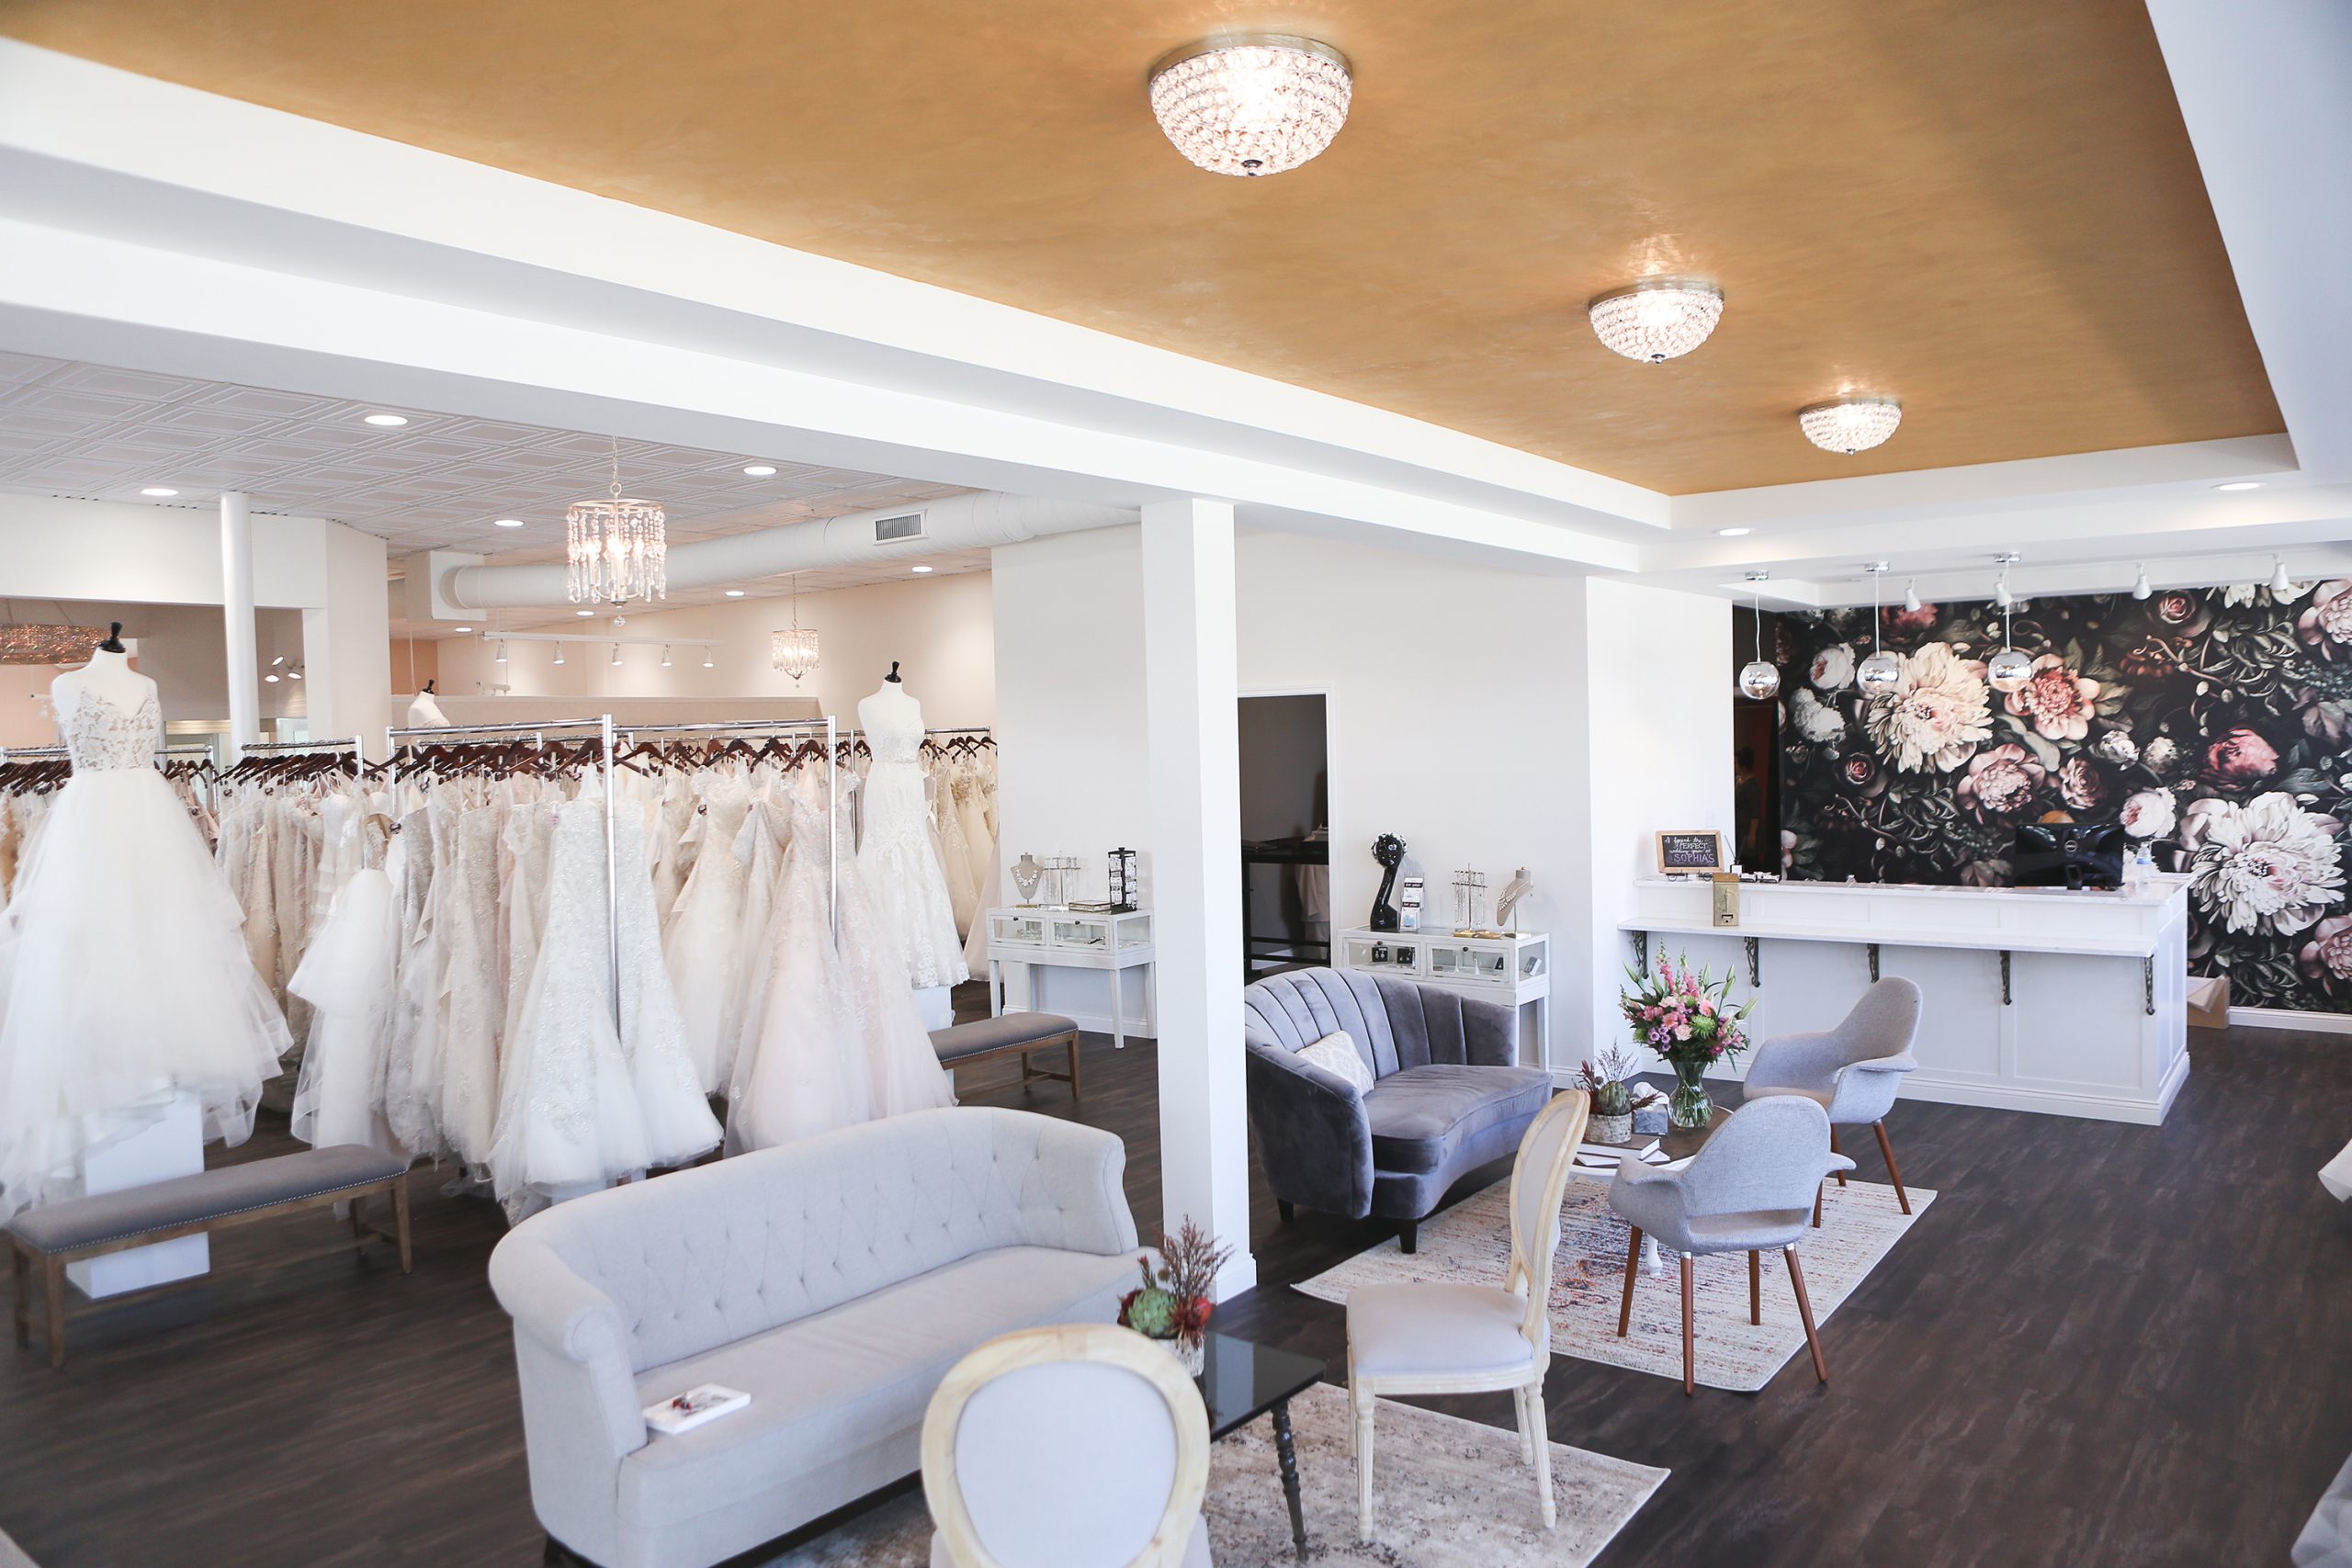 Plus Size Bridal Boutique with Couches and Wedding Dresses on Hangers